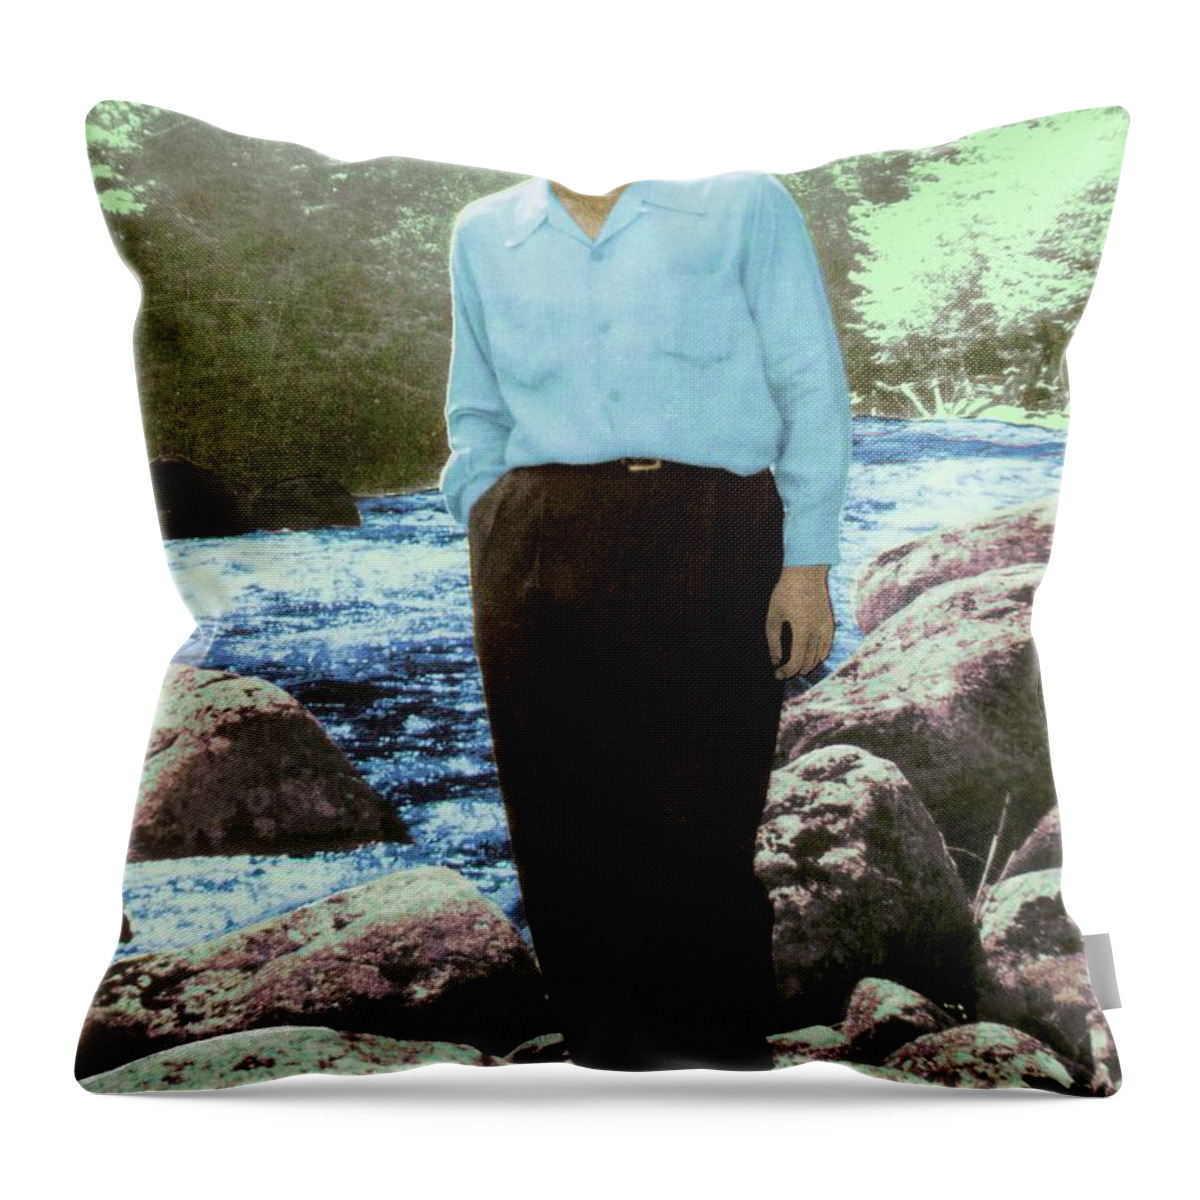 Victor Shelley Throw Pillow featuring the digital art James Mack Gurr by Victor Shelley